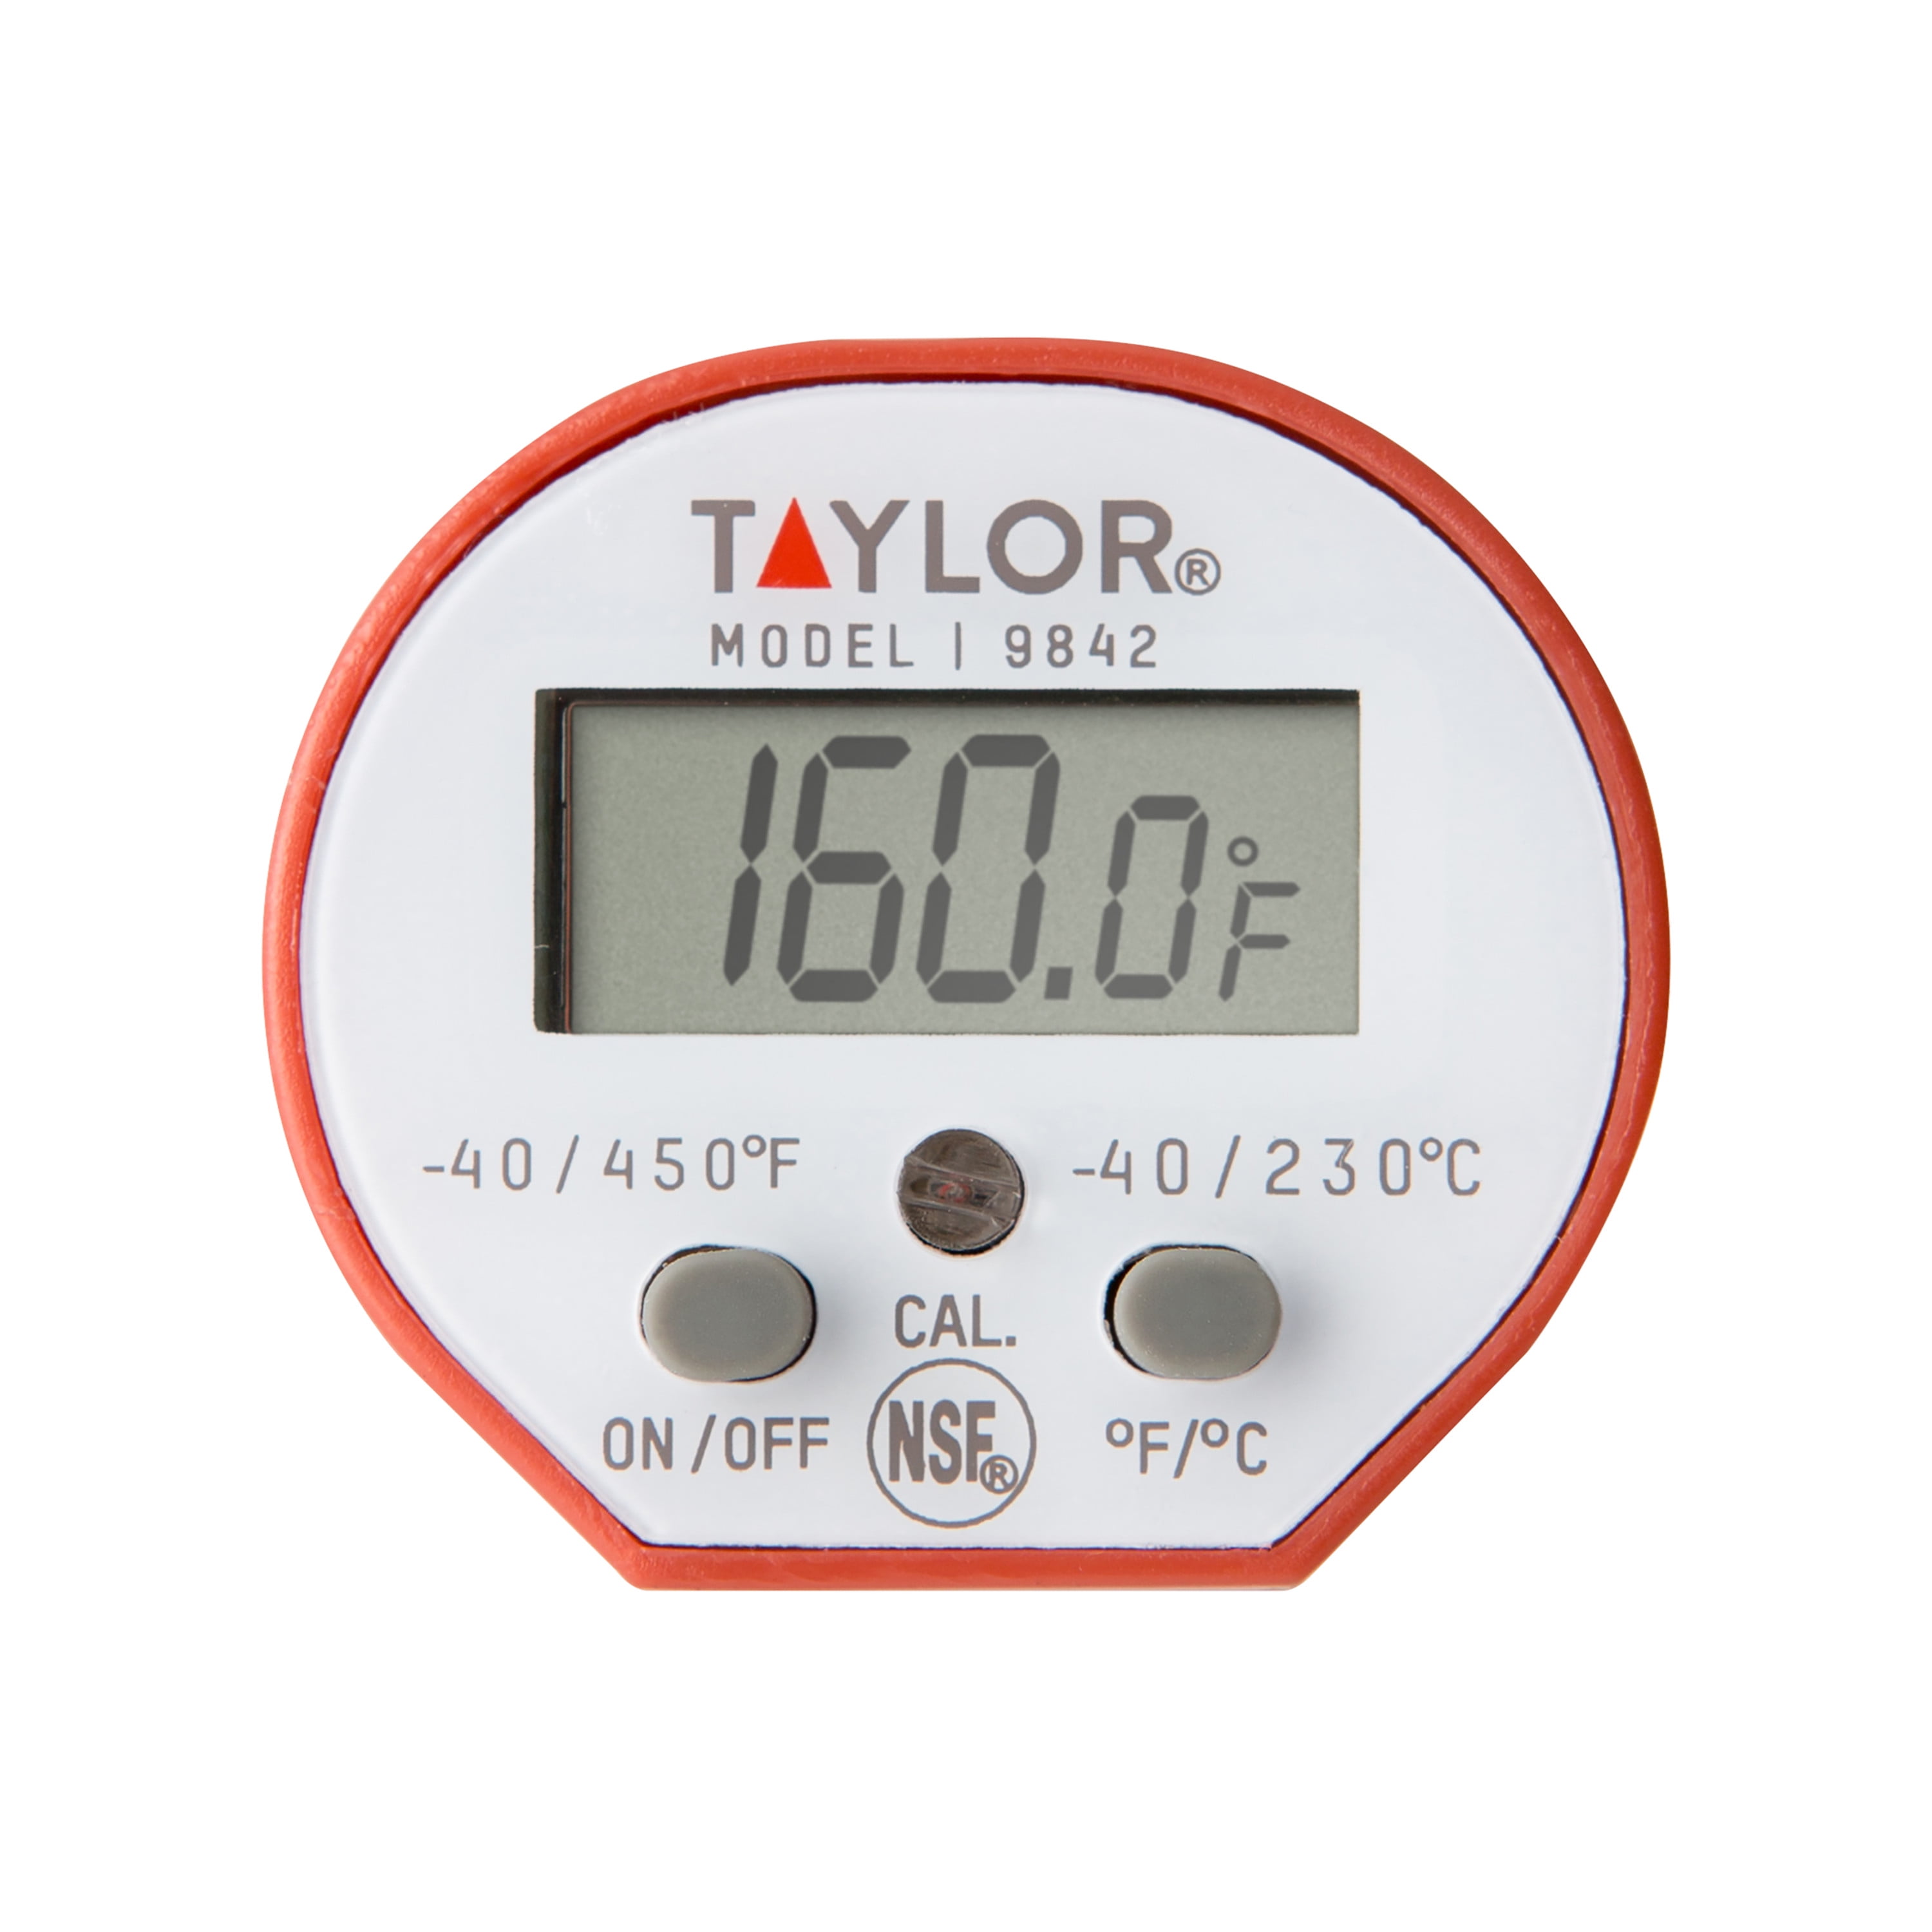 Saferell Instant Read Meat Cooking Thermometer (DT-68) for sale online